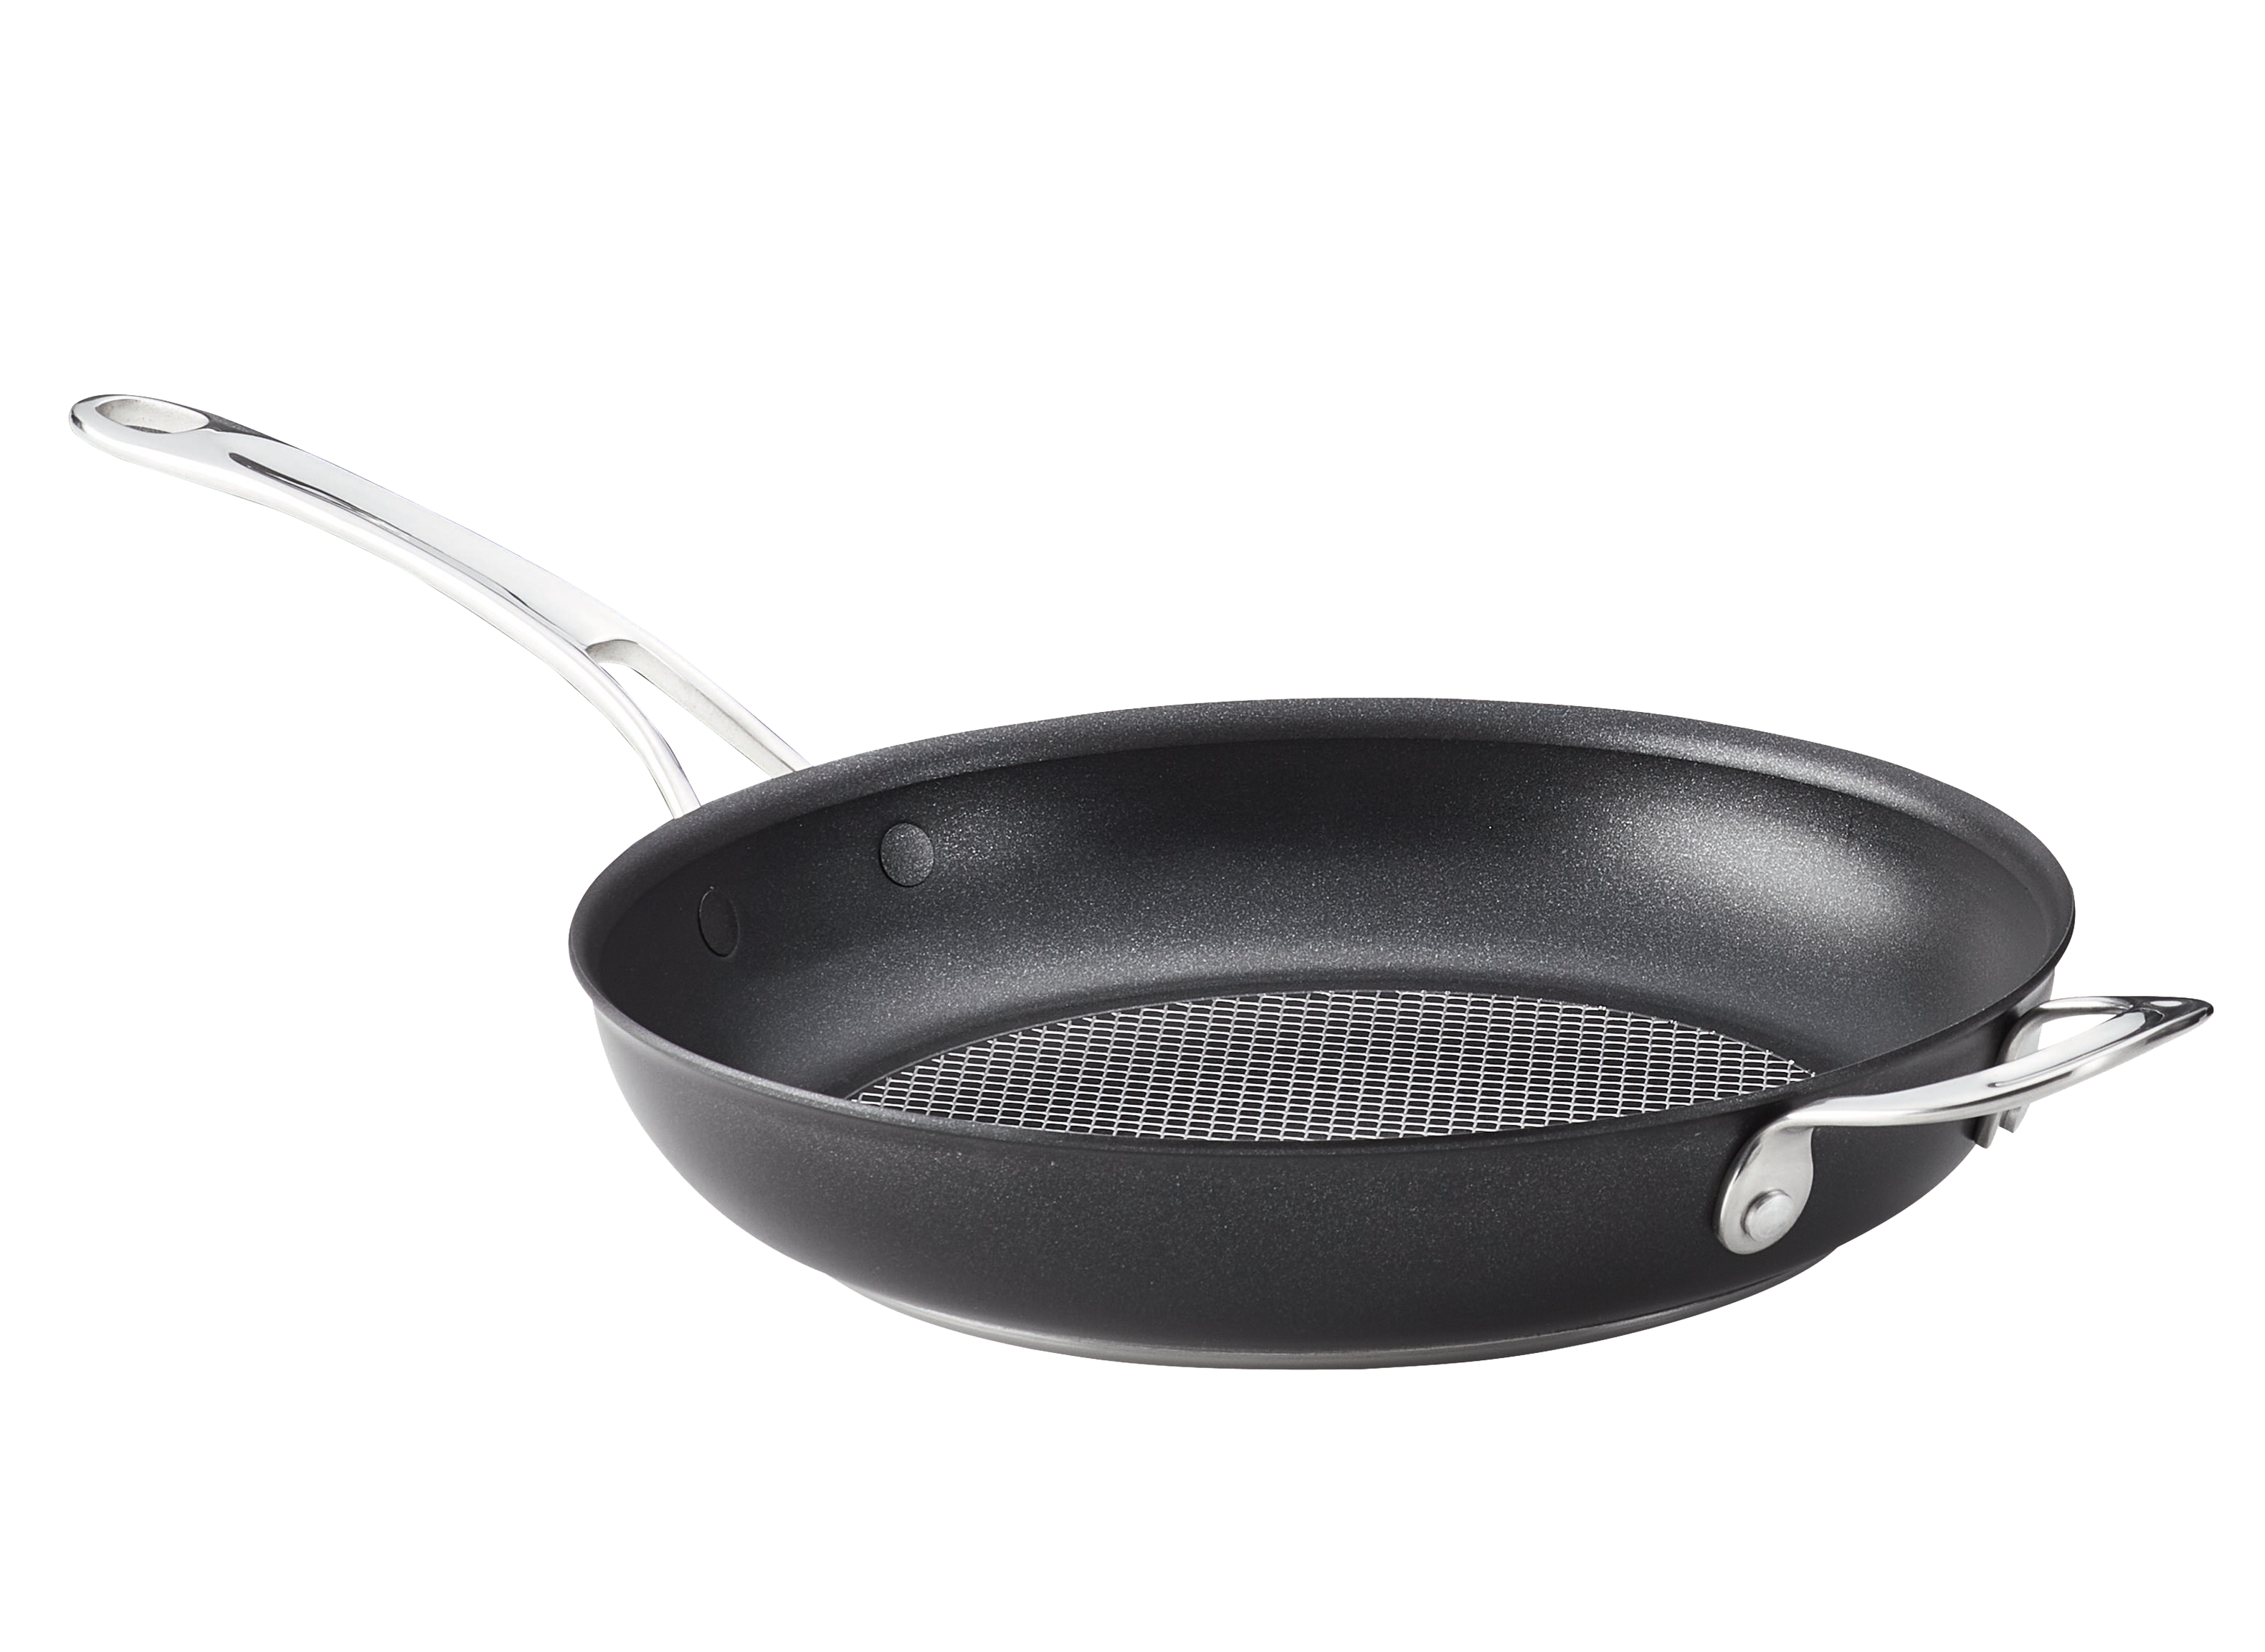 https://crdms.images.consumerreports.org/prod/products/cr/models/404682-frying-pans-nonstick-anolon-x-10023260.png